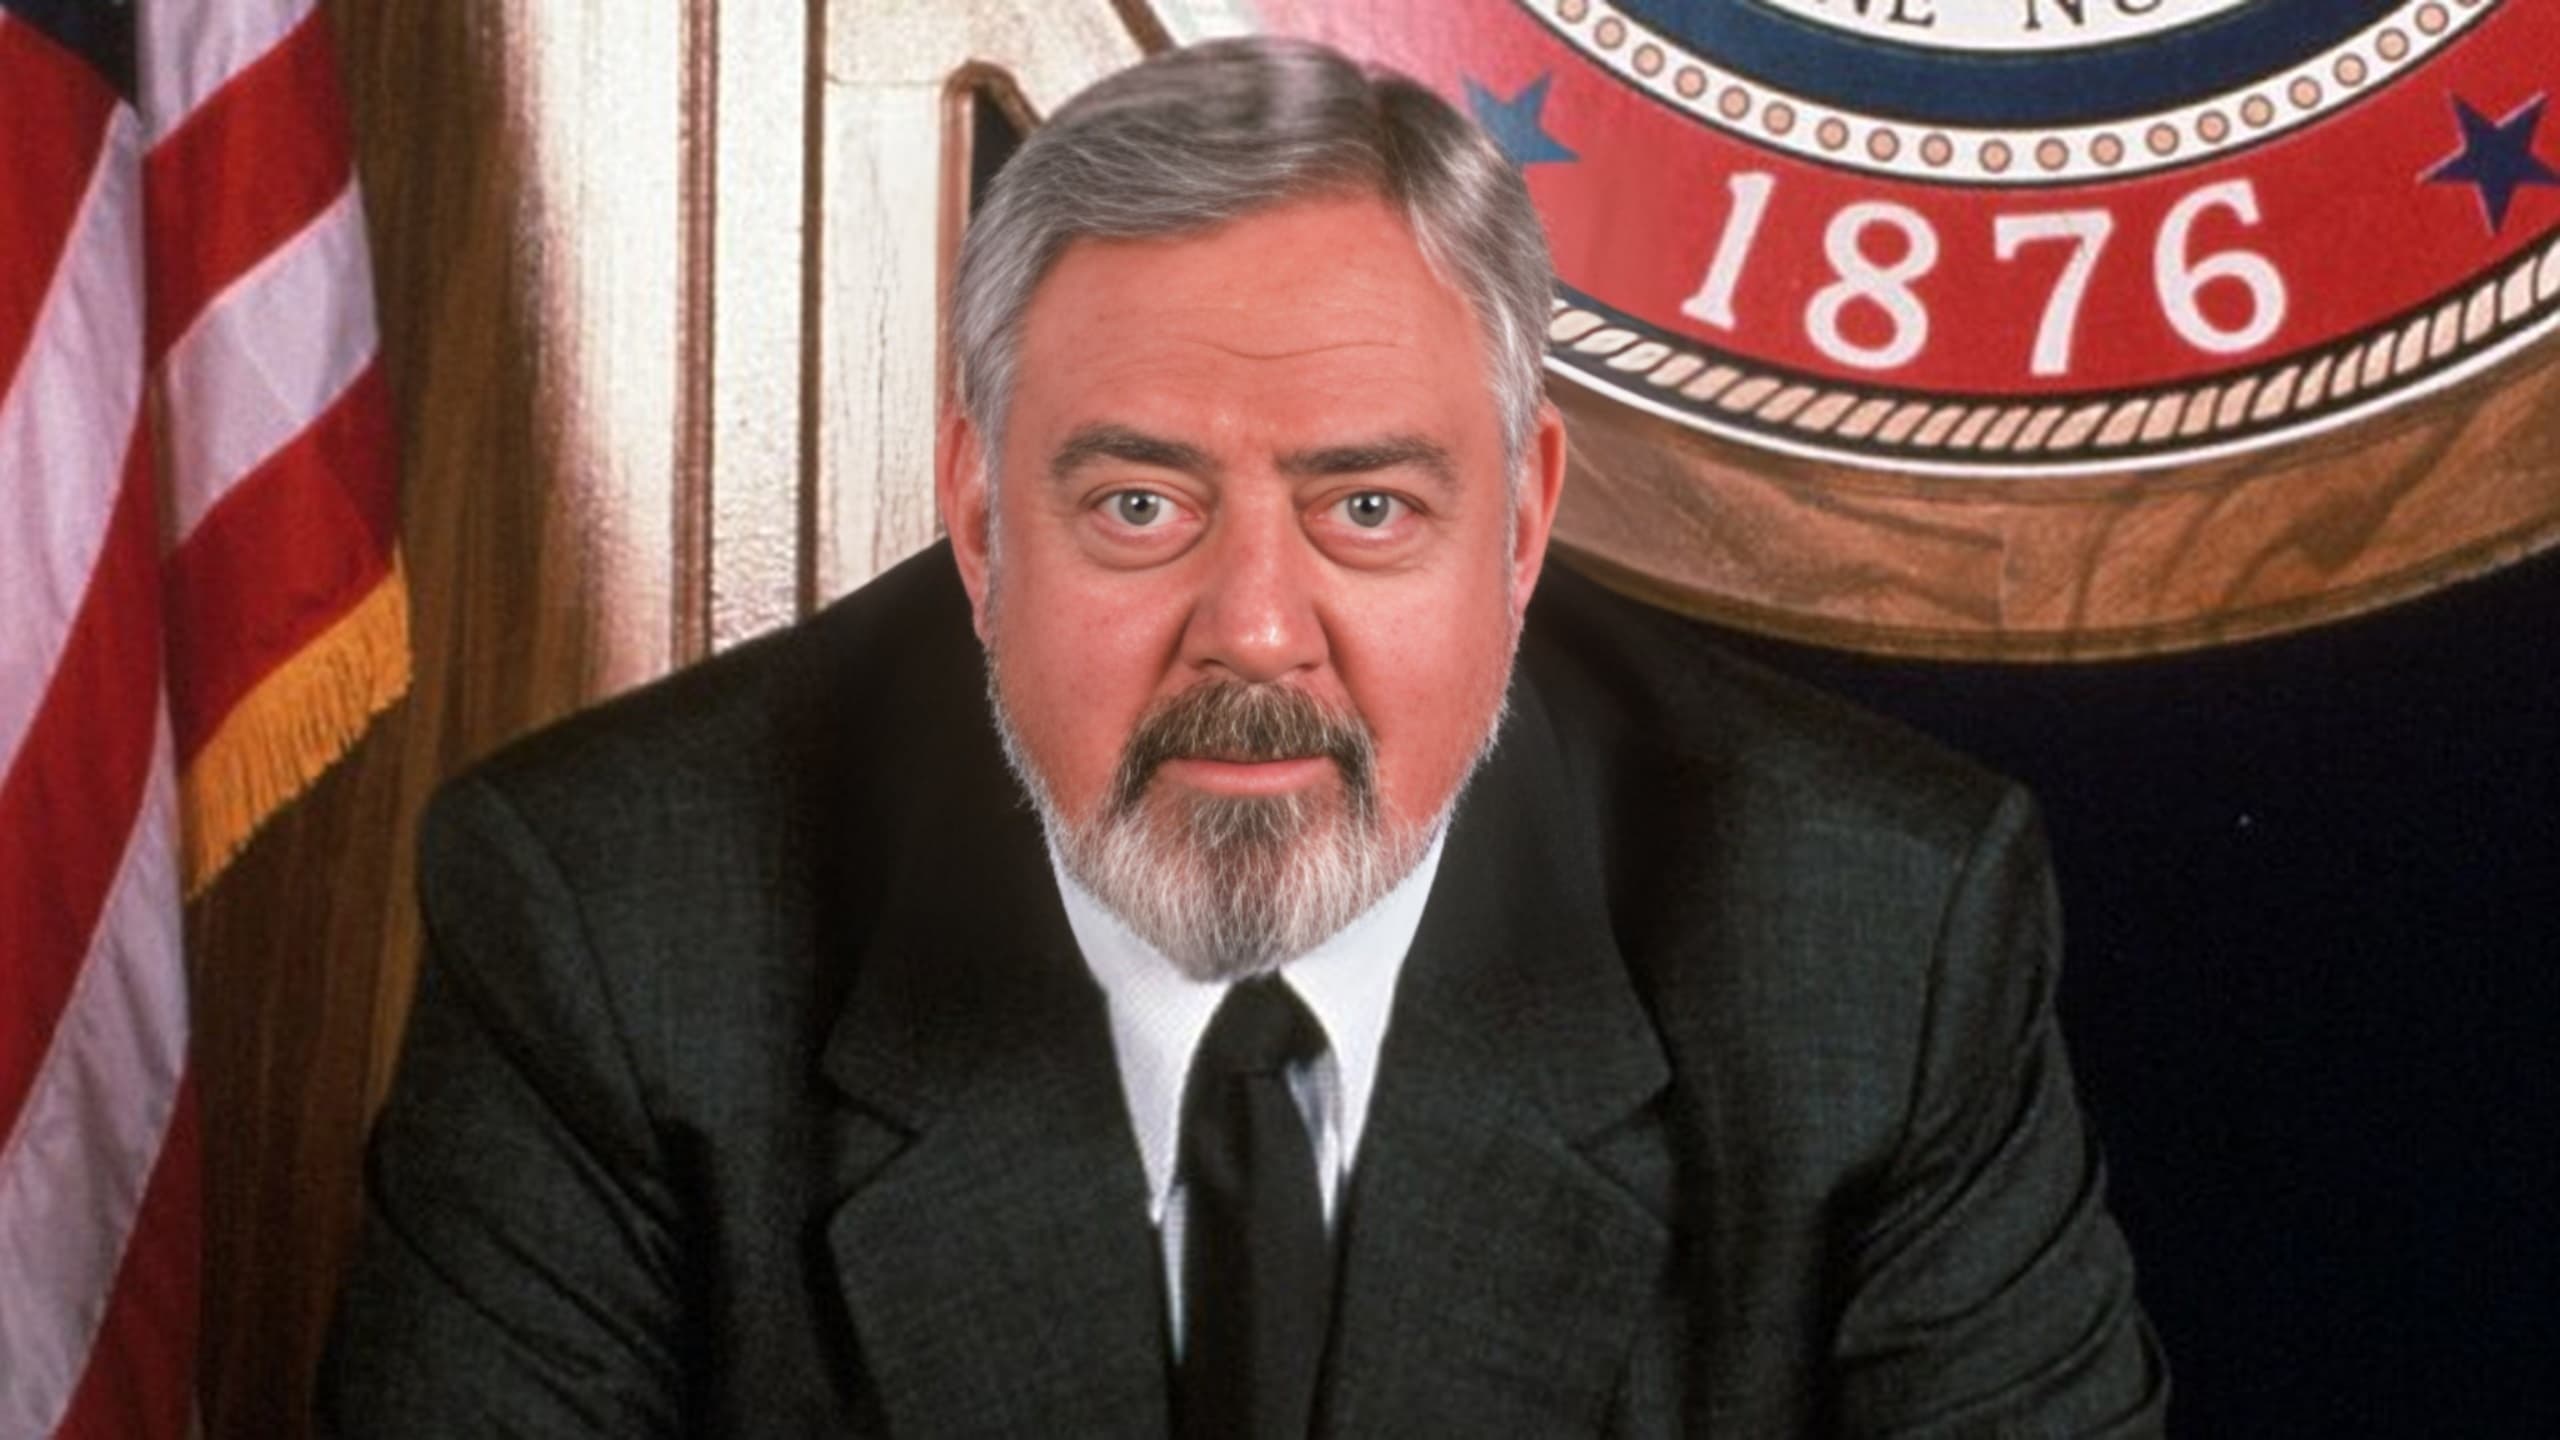 Perry Mason: The Case of the Reckless Romeo